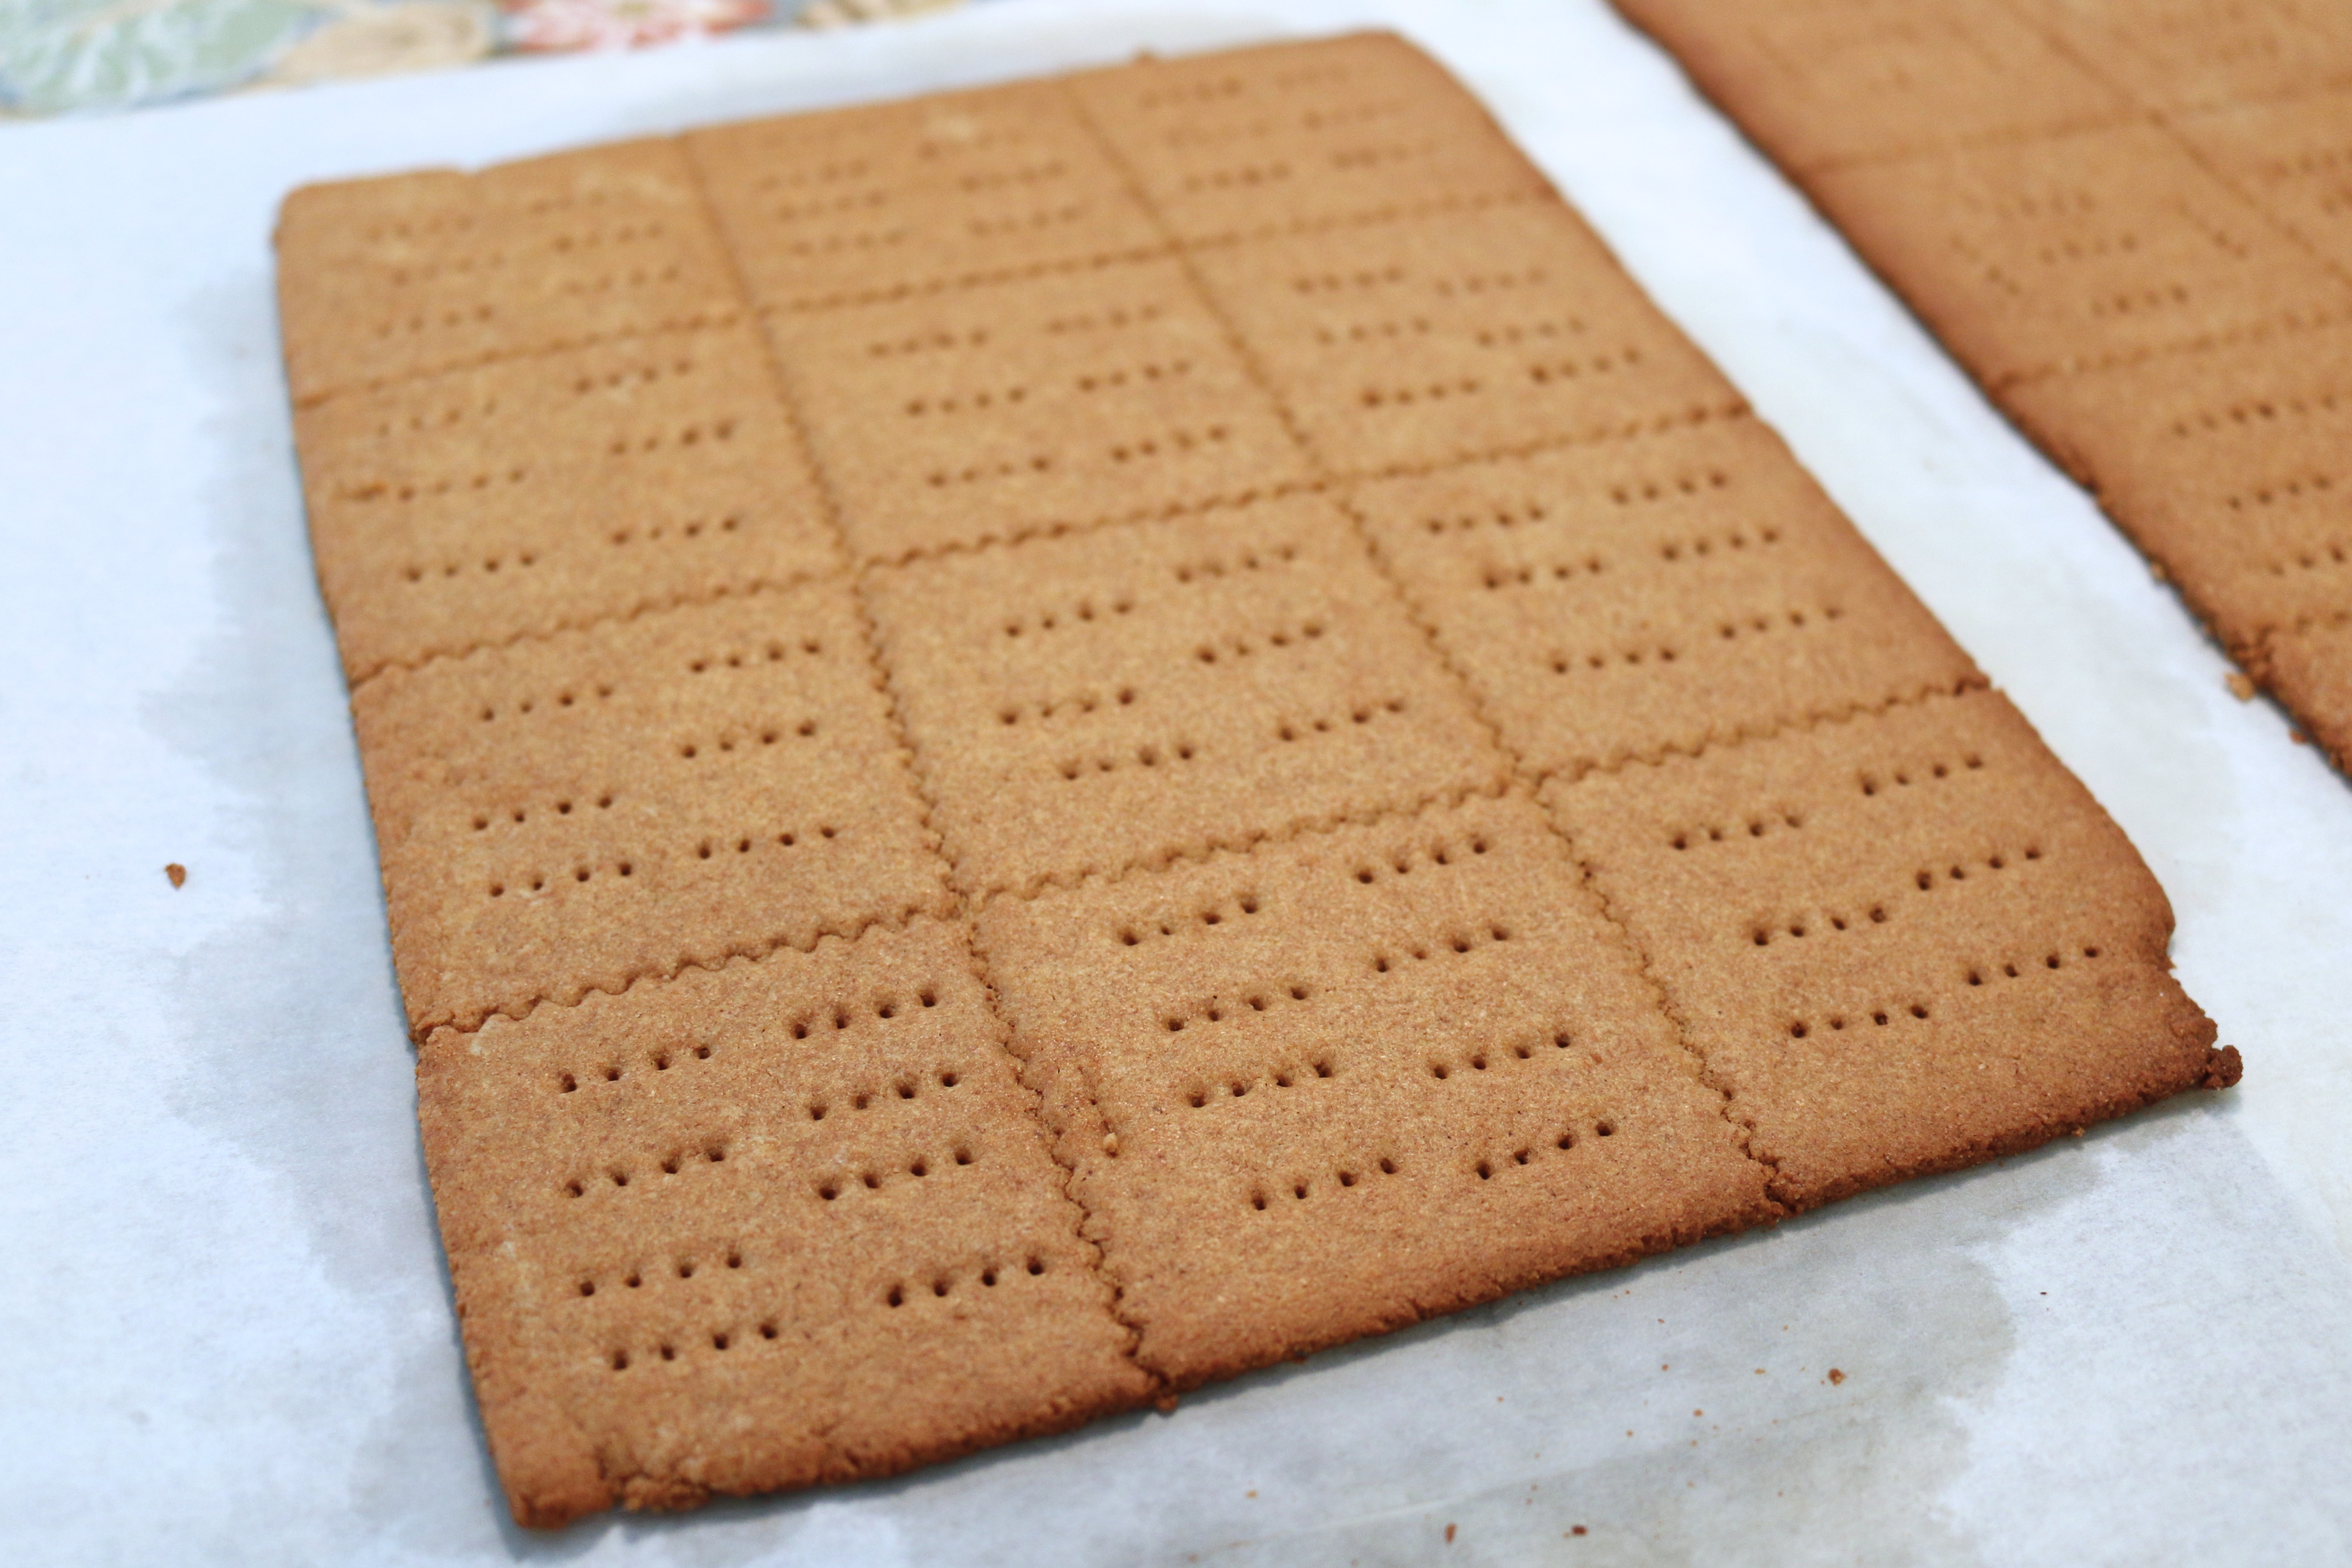 Homemade Graham Crackers: #Recipe - Finding Our Way Now How To Cut Graham Crackers Without Breaking